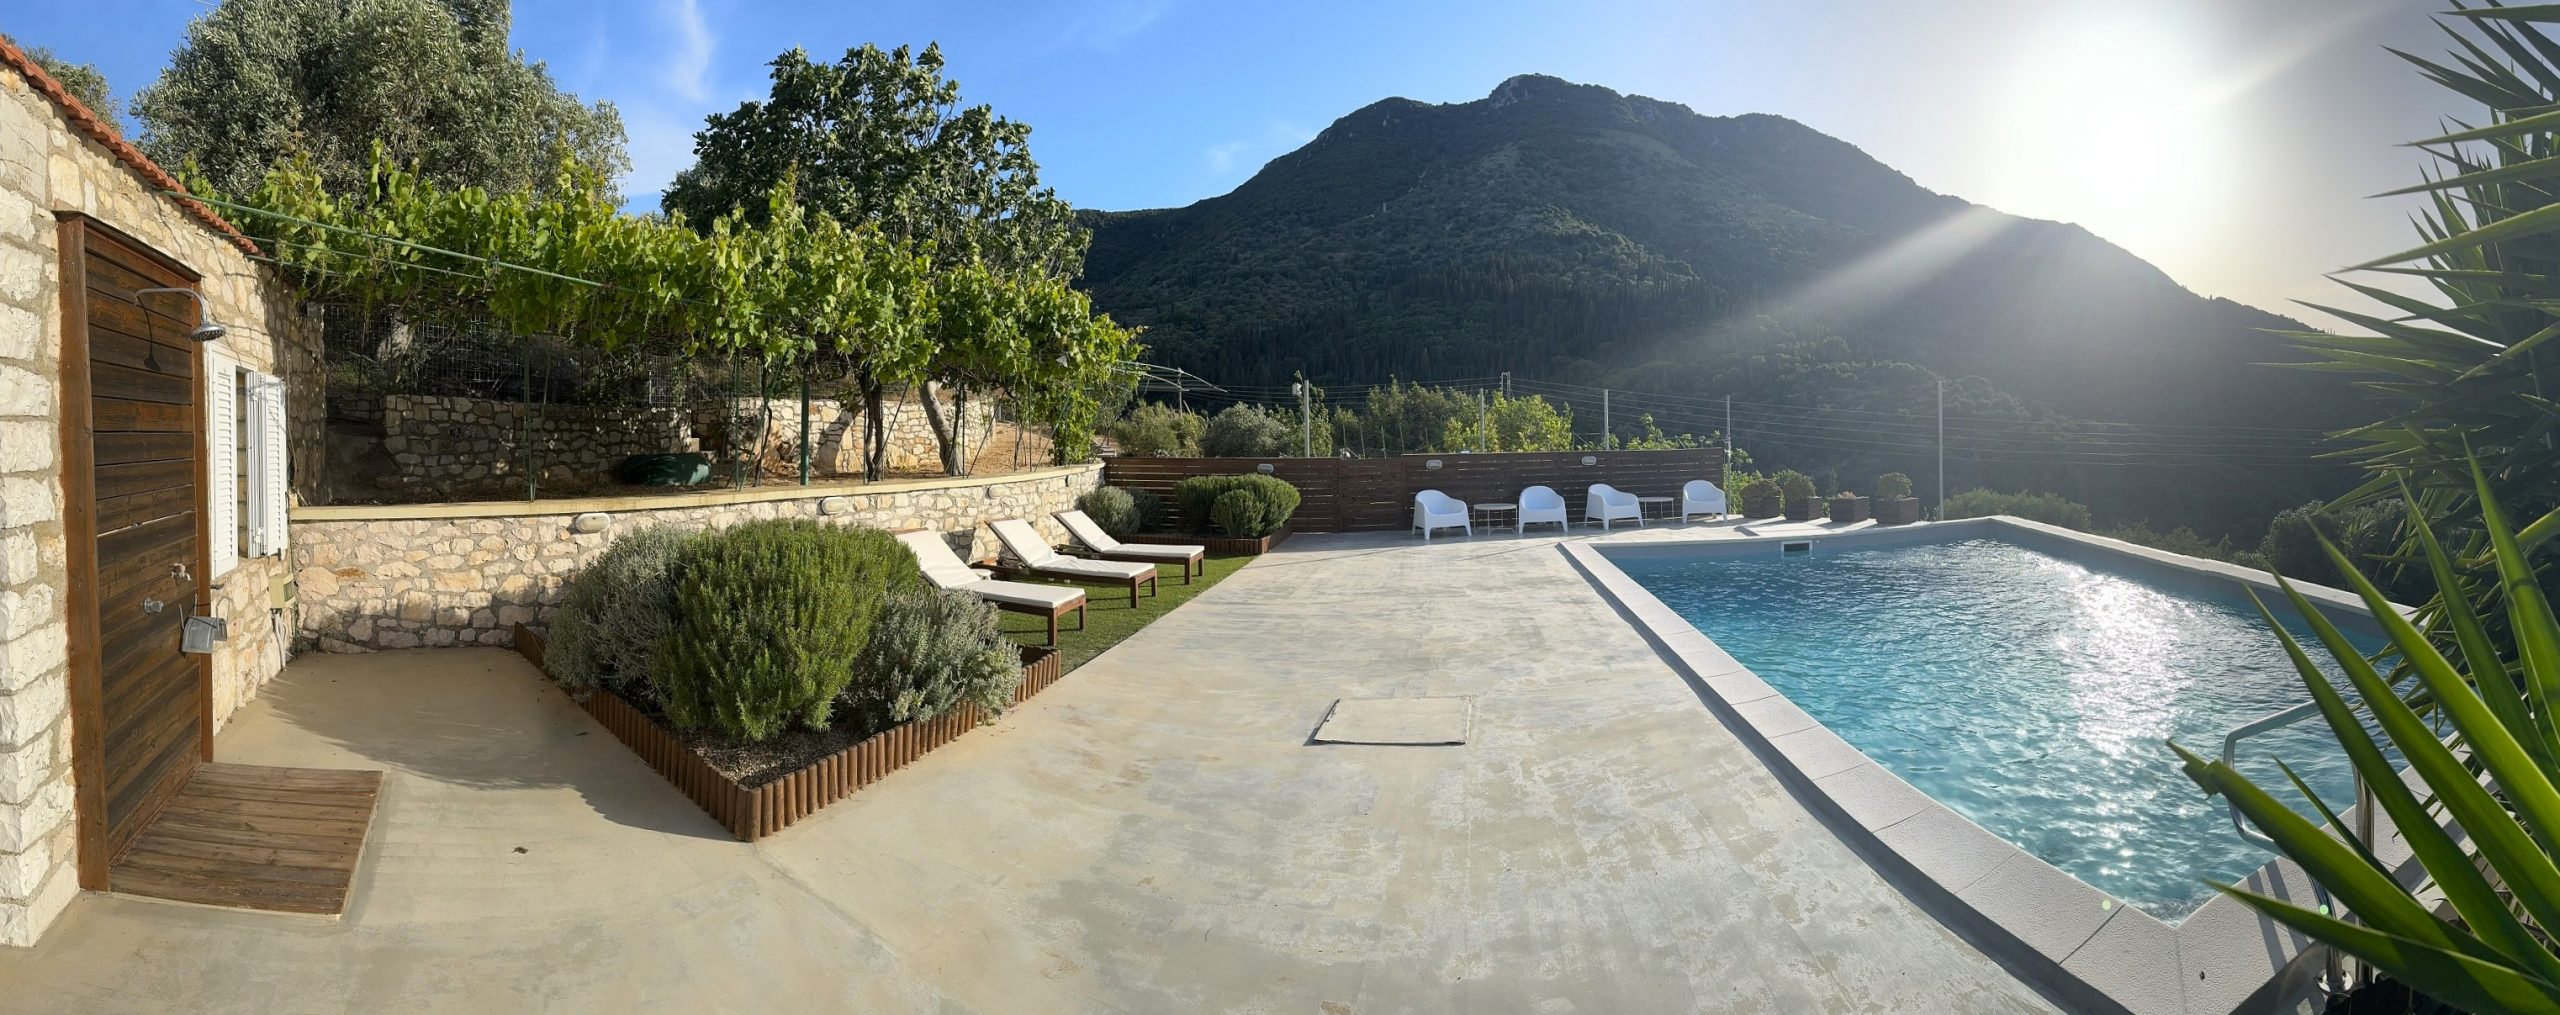 Panoramic view of pool area of villa for rent in Ithaca Greece Perachori